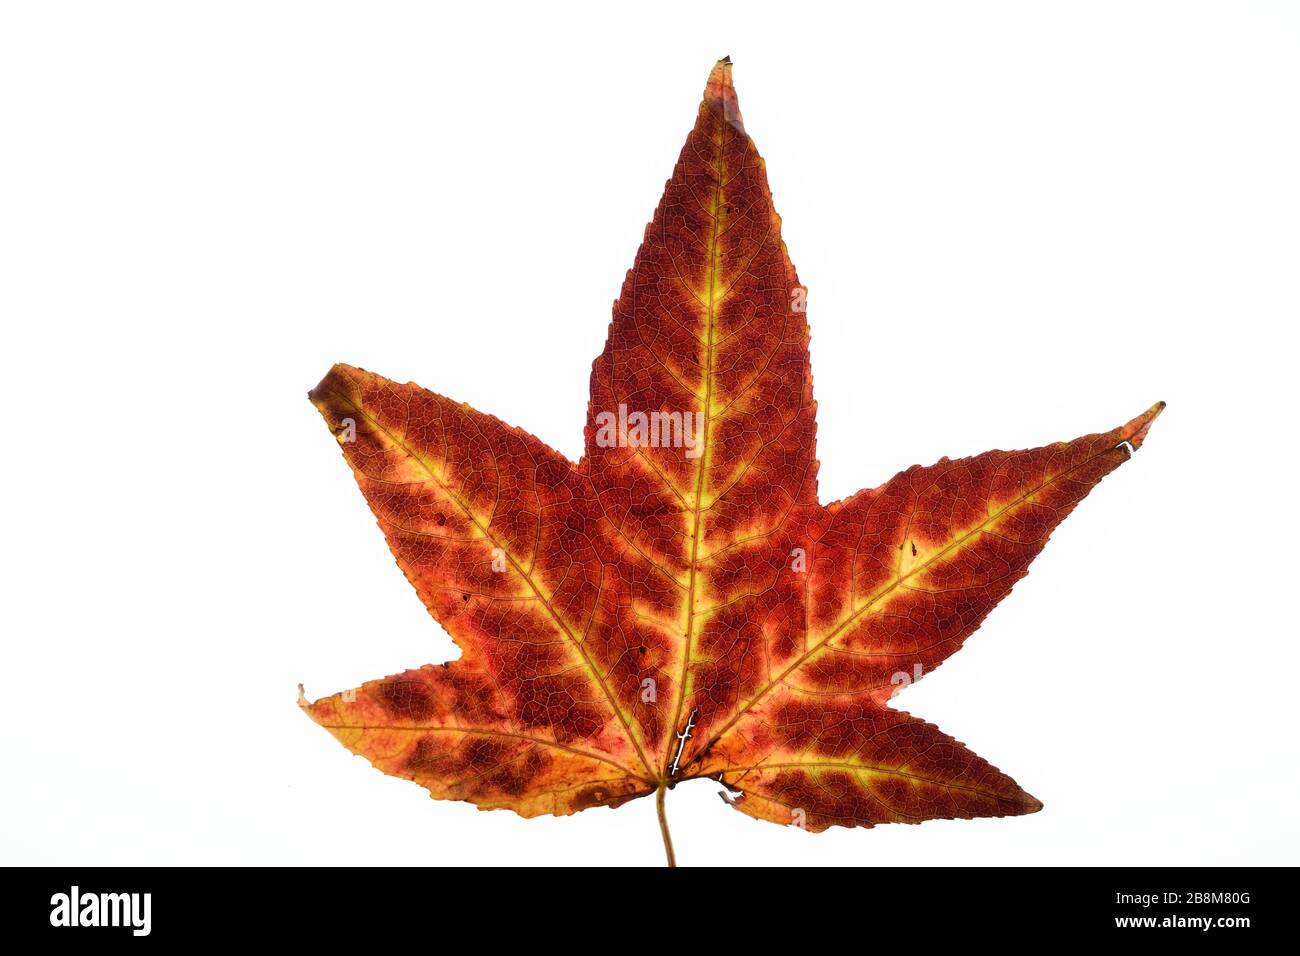 Autumn leaf of the Japanese Maple tree on a white background. Stock Photo